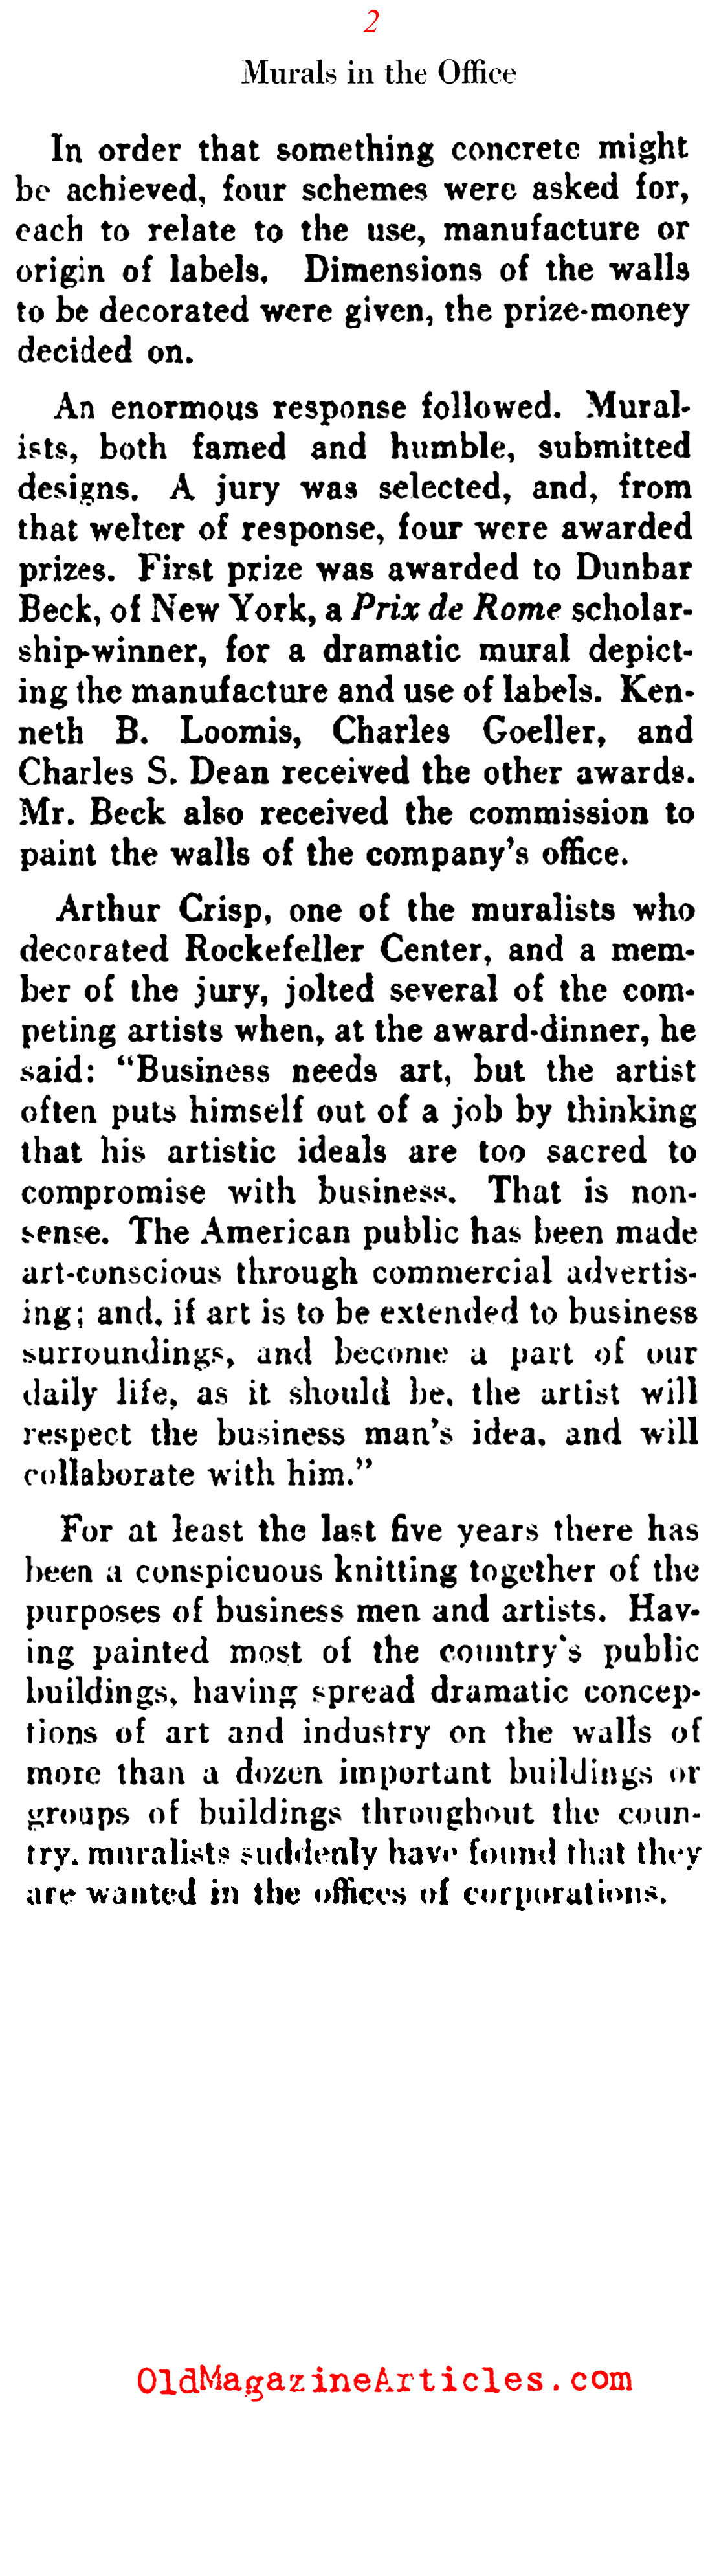 Public Murals: the Art of the 1930s  (Literary Digest, 1935)